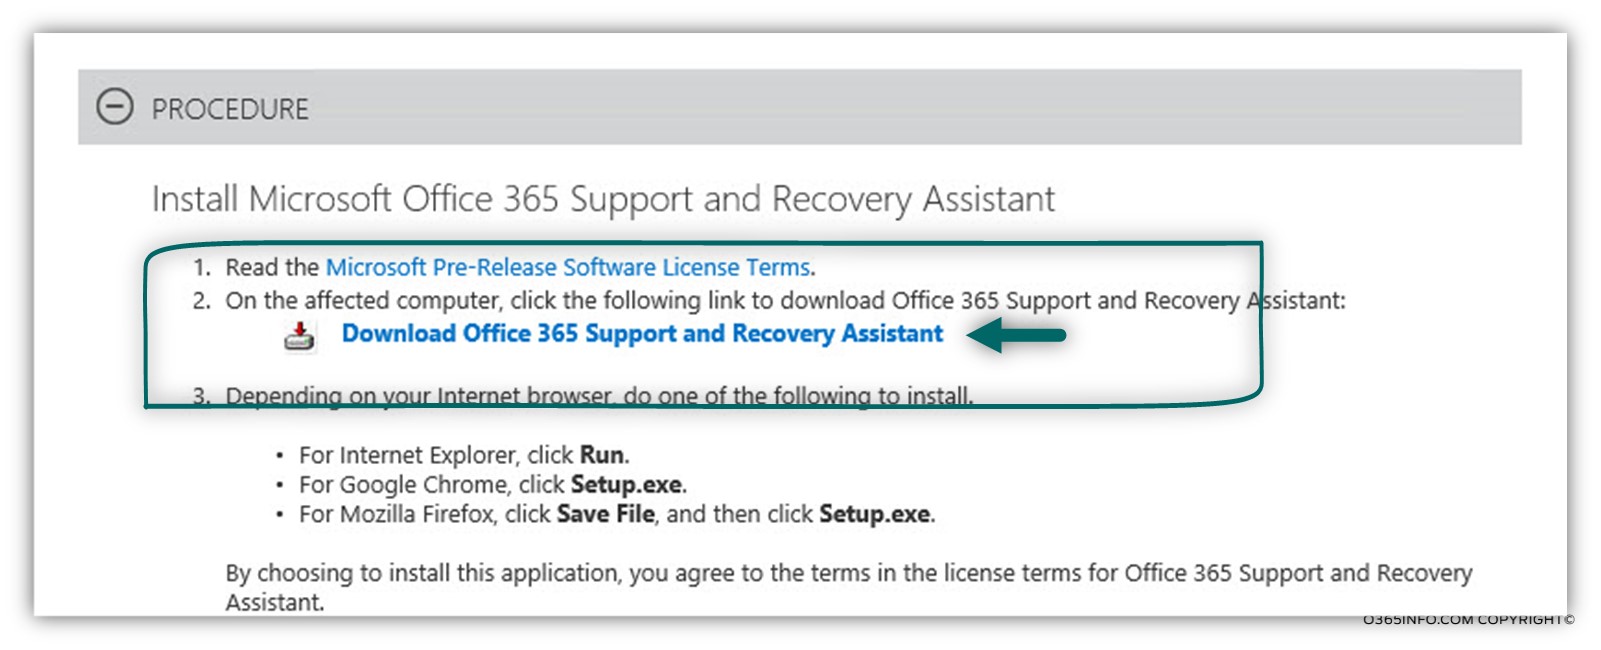 Install Office 365 Support and Recovery Assistant-01.jpg